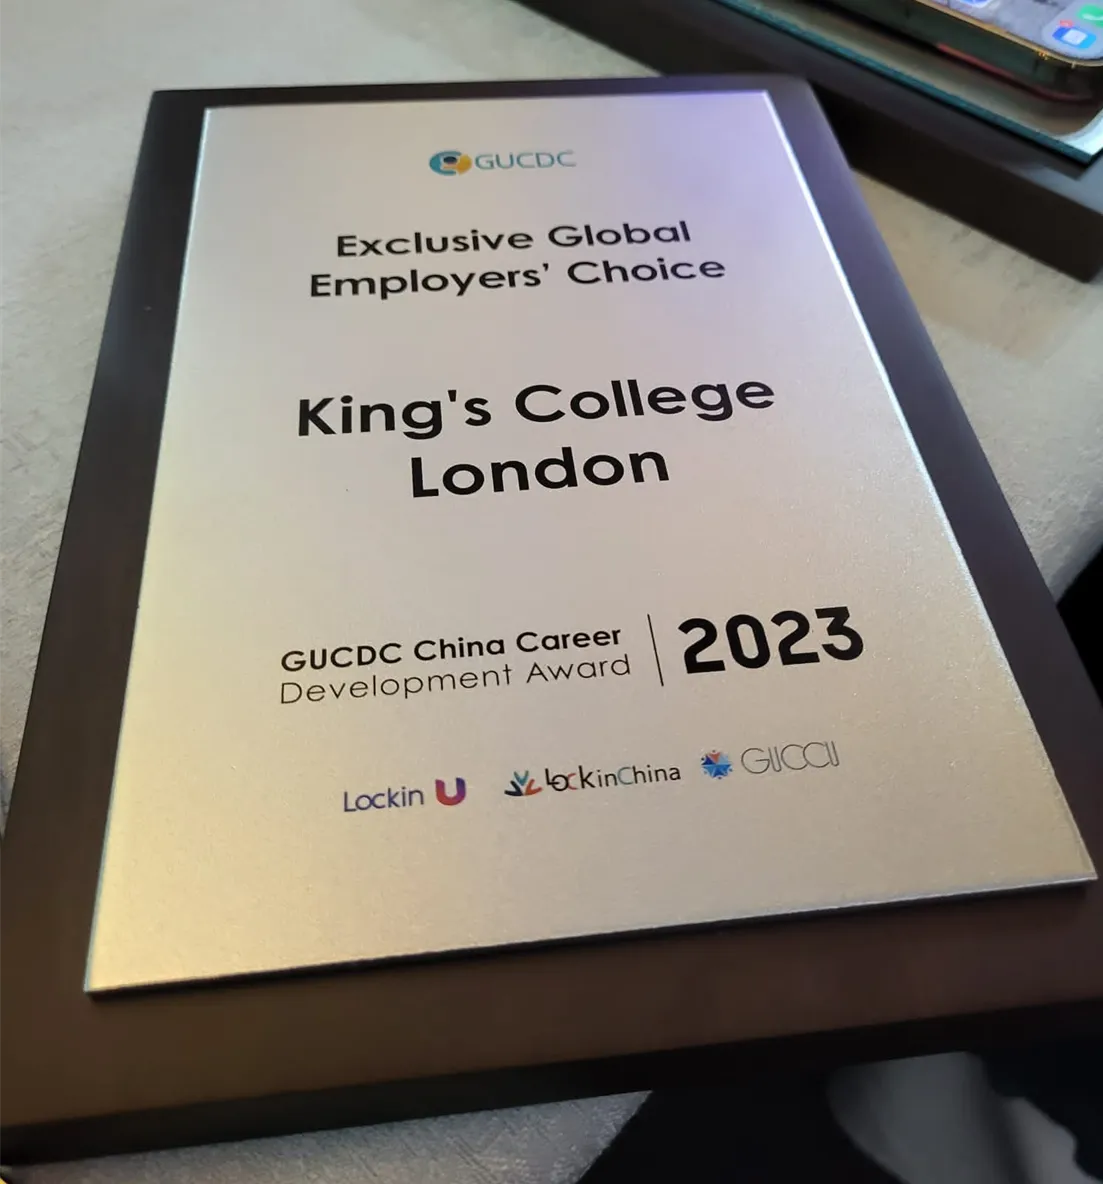 The Exclusive Global Employers' Choice Award Plaque, awarded to King's College London on 9 November 2023.